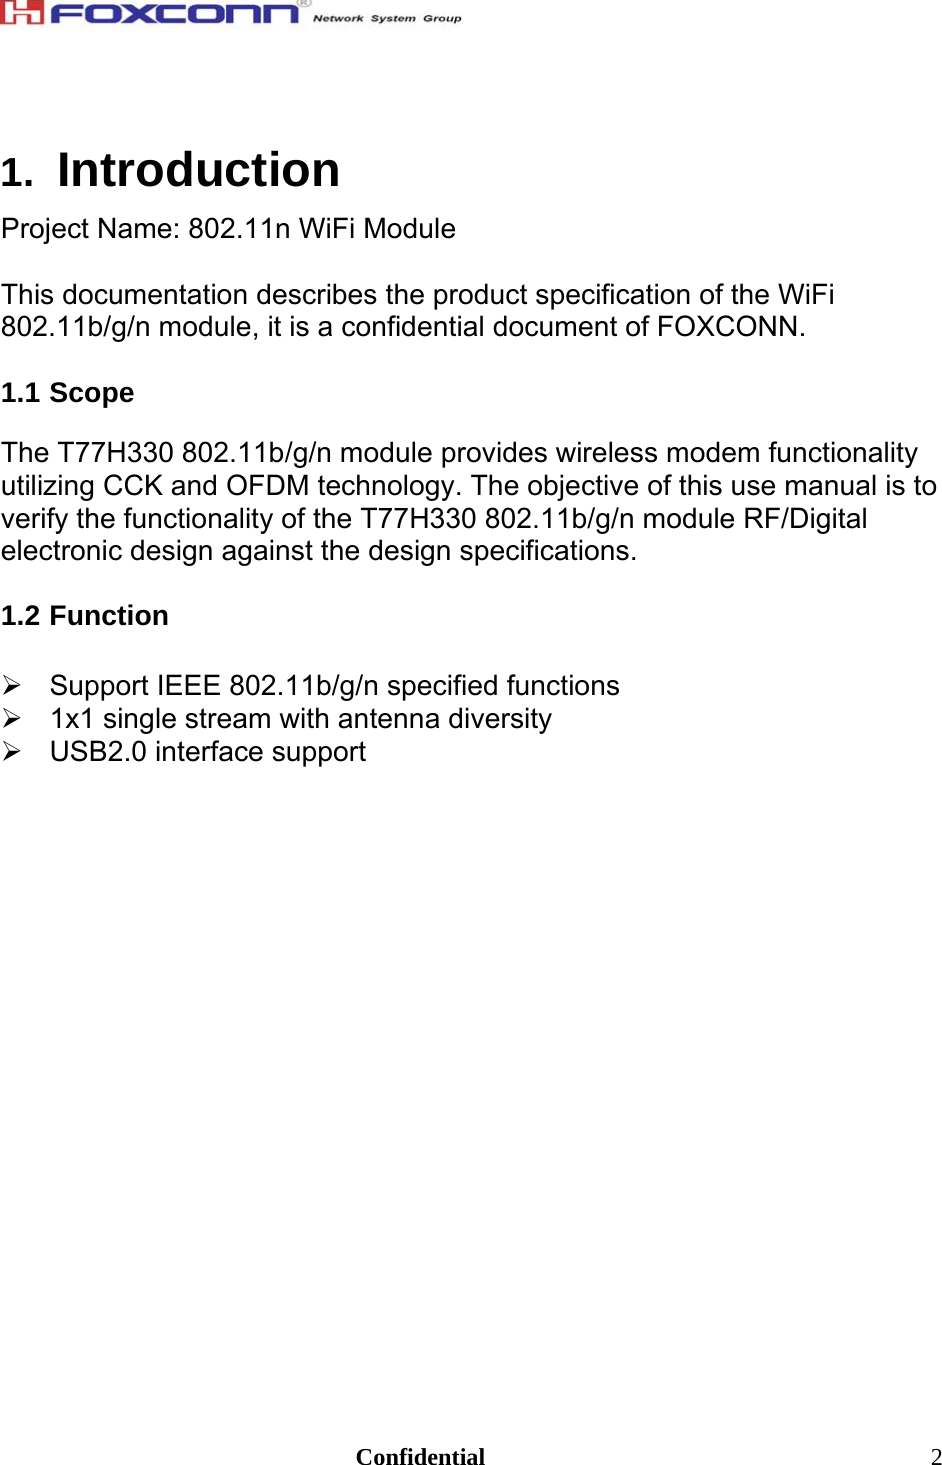                                                                               Confidential  21.  Introduction Project Name: 802.11n WiFi Module  This documentation describes the product specification of the WiFi 802.11b/g/n module, it is a confidential document of FOXCONN.  1.1 Scope  The T77H330 802.11b/g/n module provides wireless modem functionality utilizing CCK and OFDM technology. The objective of this use manual is to verify the functionality of the T77H330 802.11b/g/n module RF/Digital electronic design against the design specifications.   1.2 Function  ¾  Support IEEE 802.11b/g/n specified functions ¾  1x1 single stream with antenna diversity ¾ USB2.0 interface support  